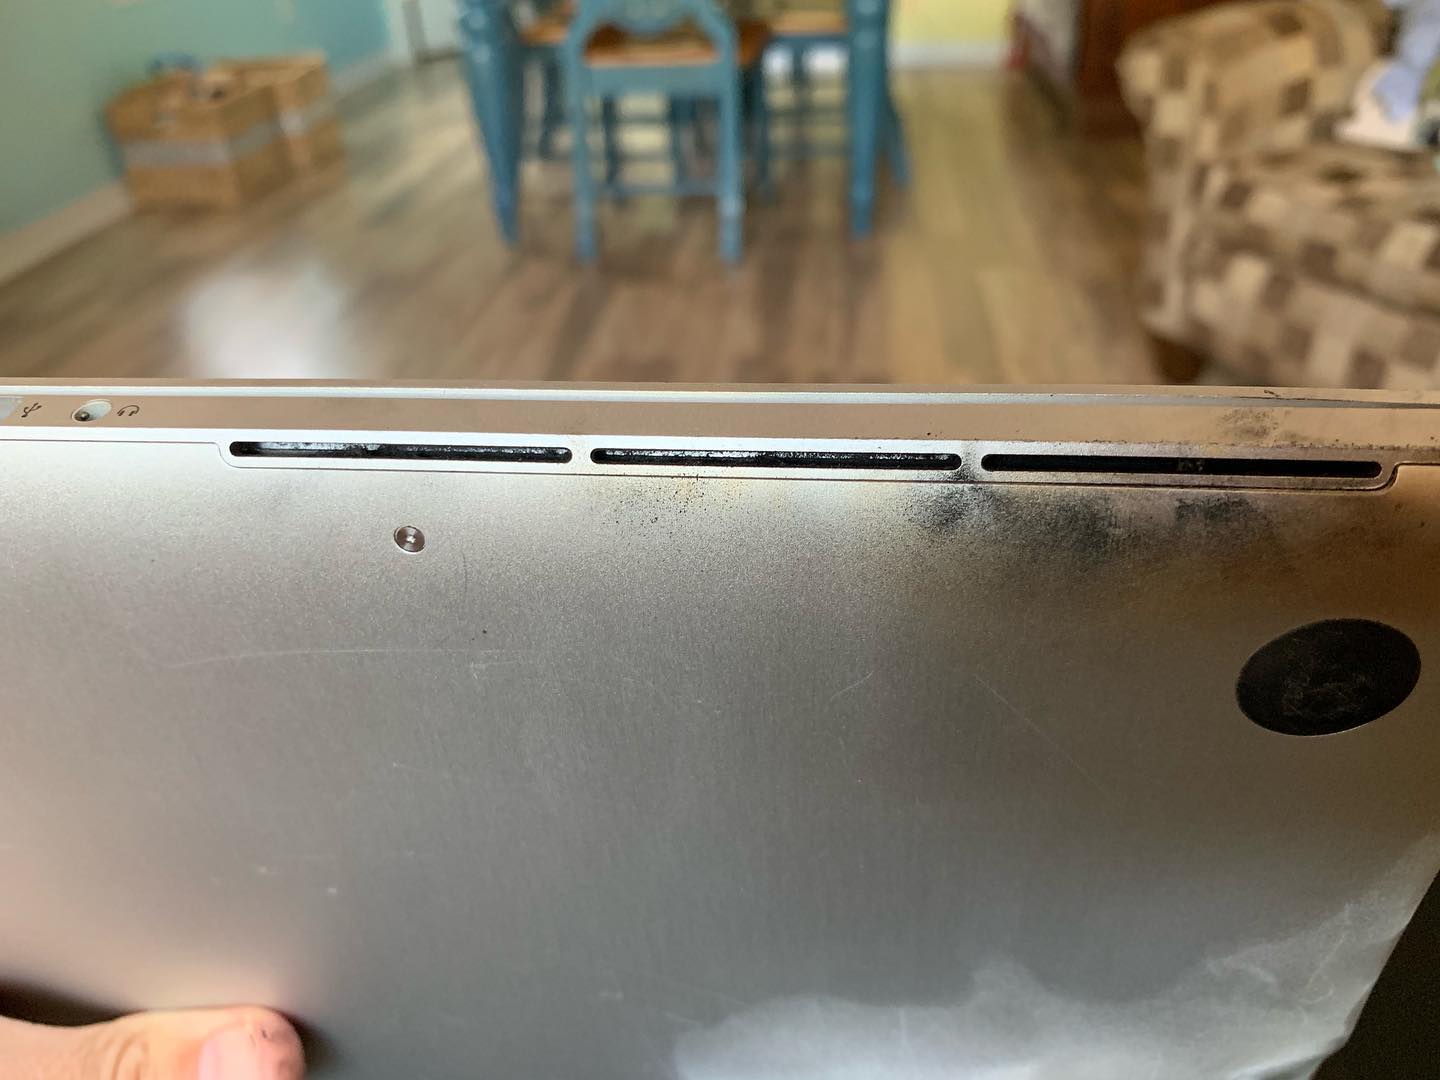 macbook pro fire may be linked to apples recent laptop recall 2